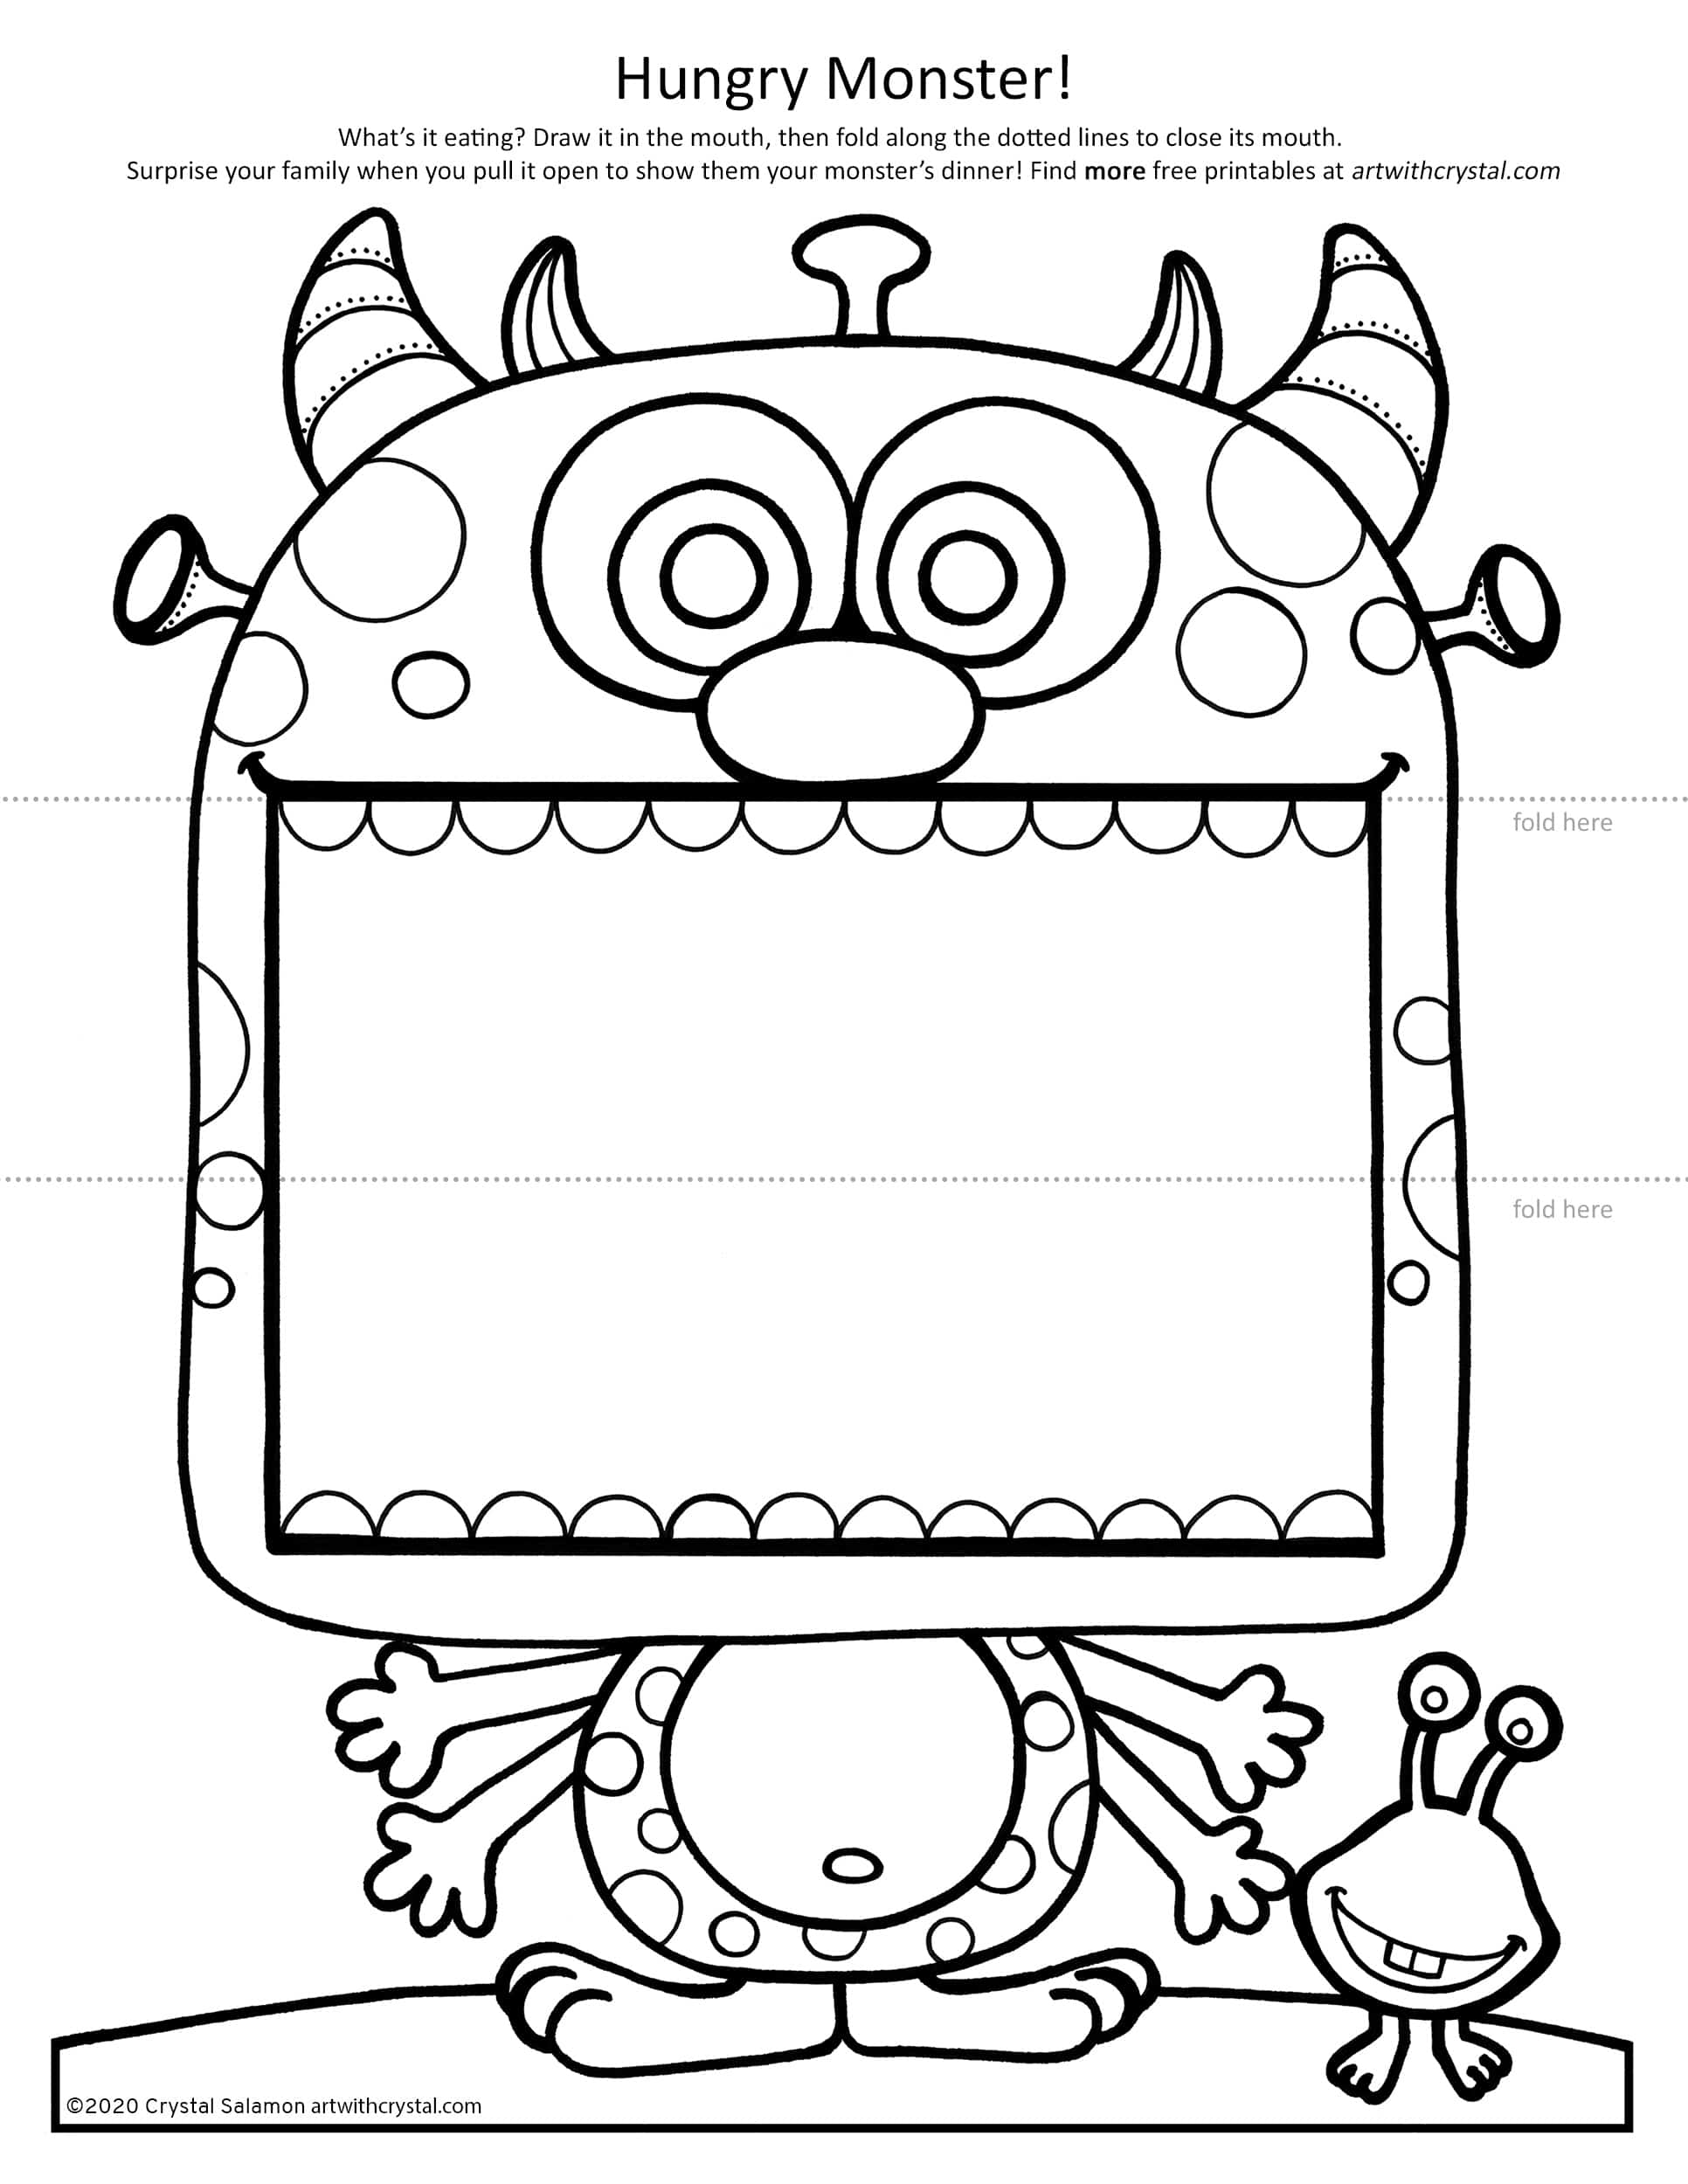 Big mouth monster colouring page free printable art with crystal